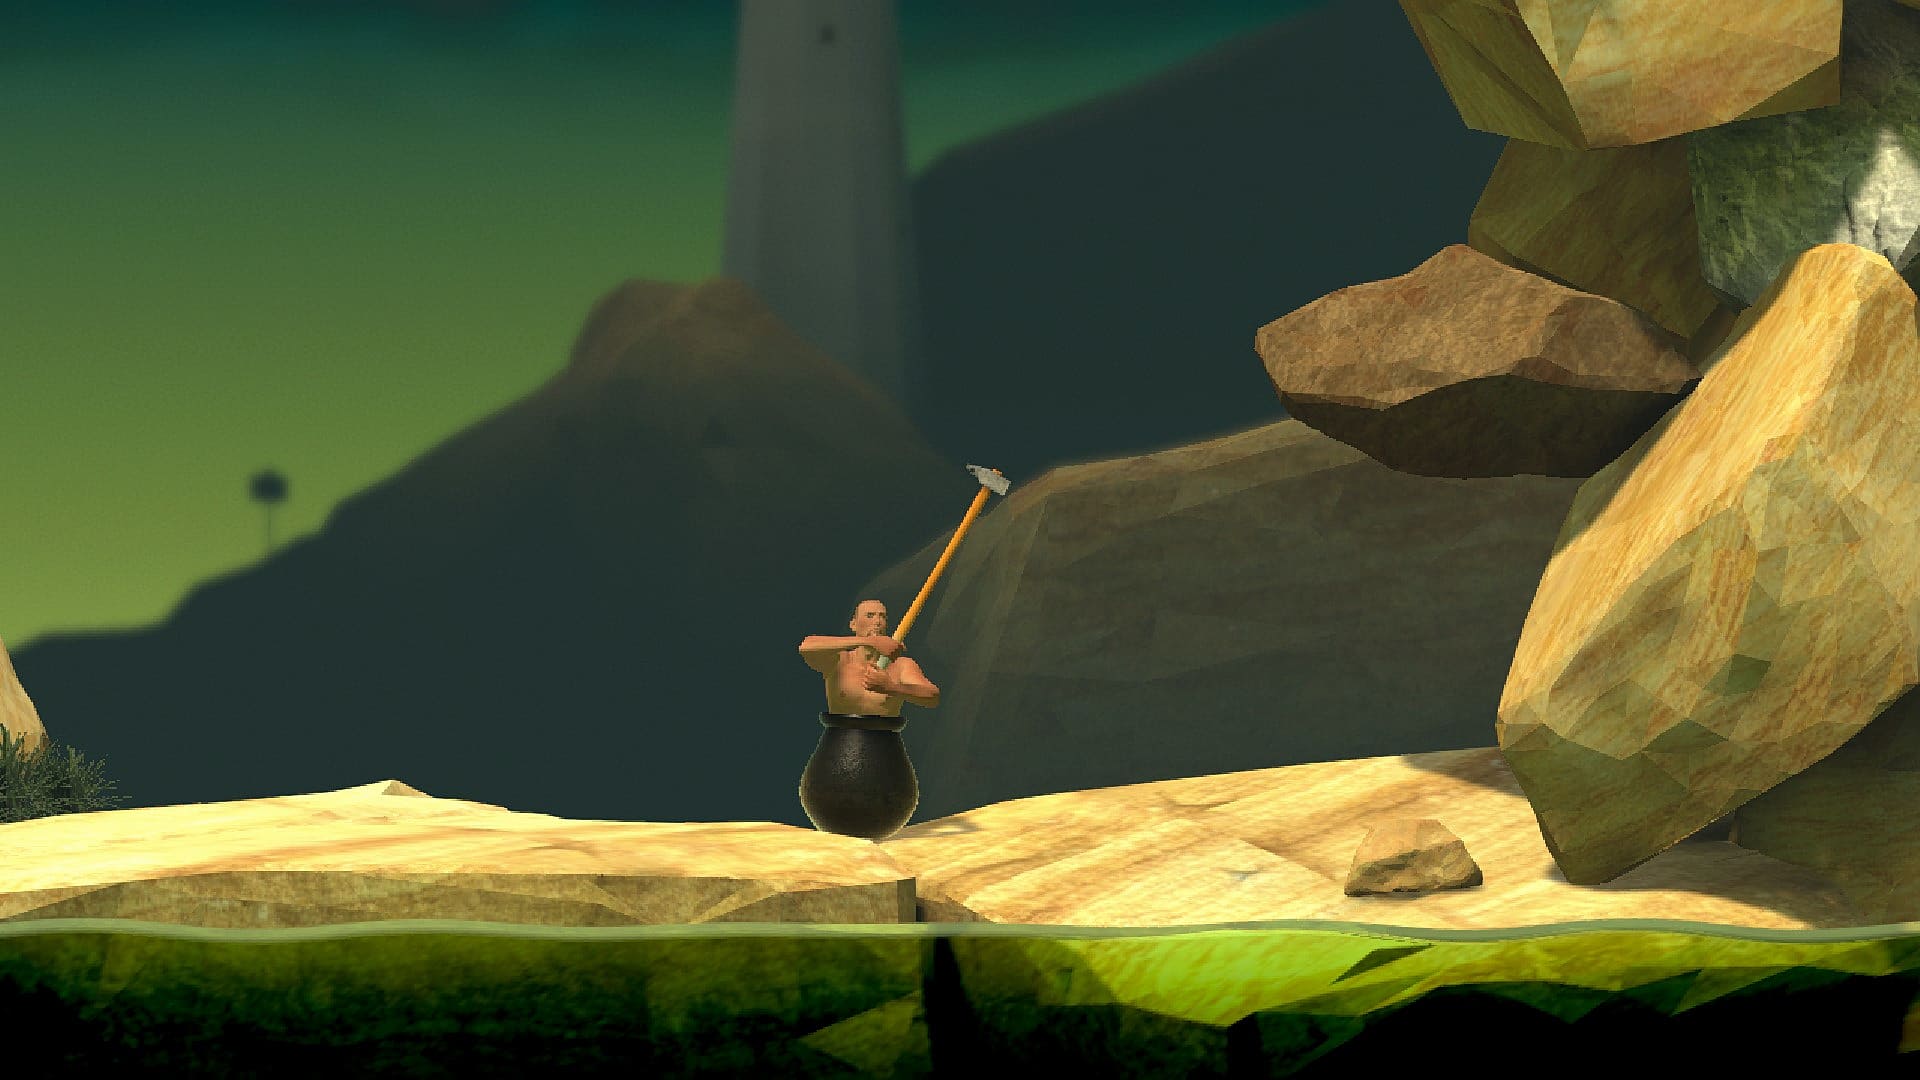 igg games getting over it with bennett foddy